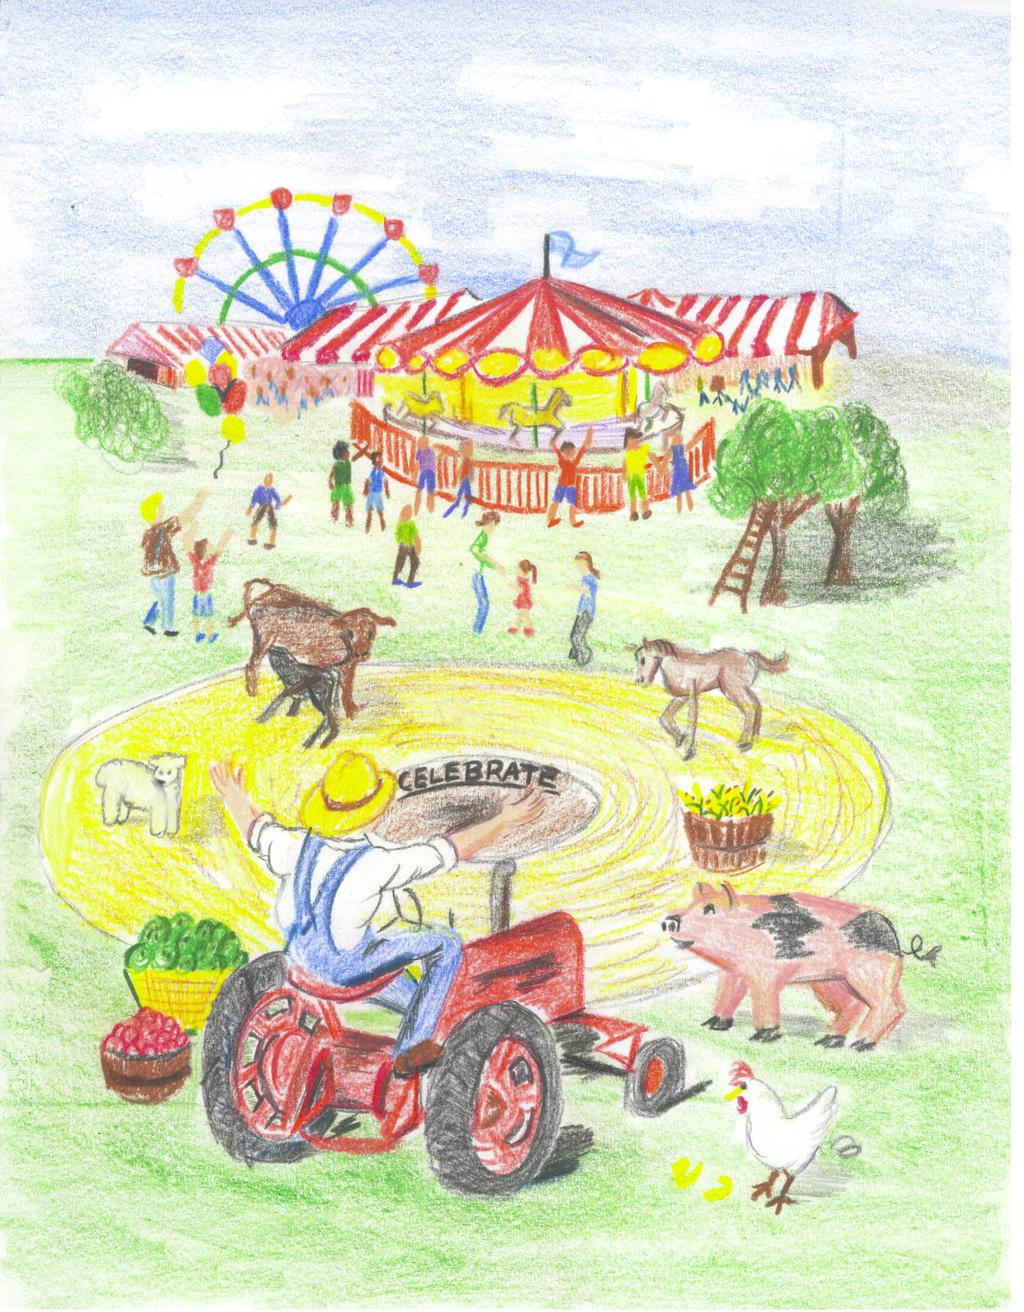 LET THE GOOD TIMES GROW AT THE GREENE COUNTY FAIR JULY 30TH - AUG.